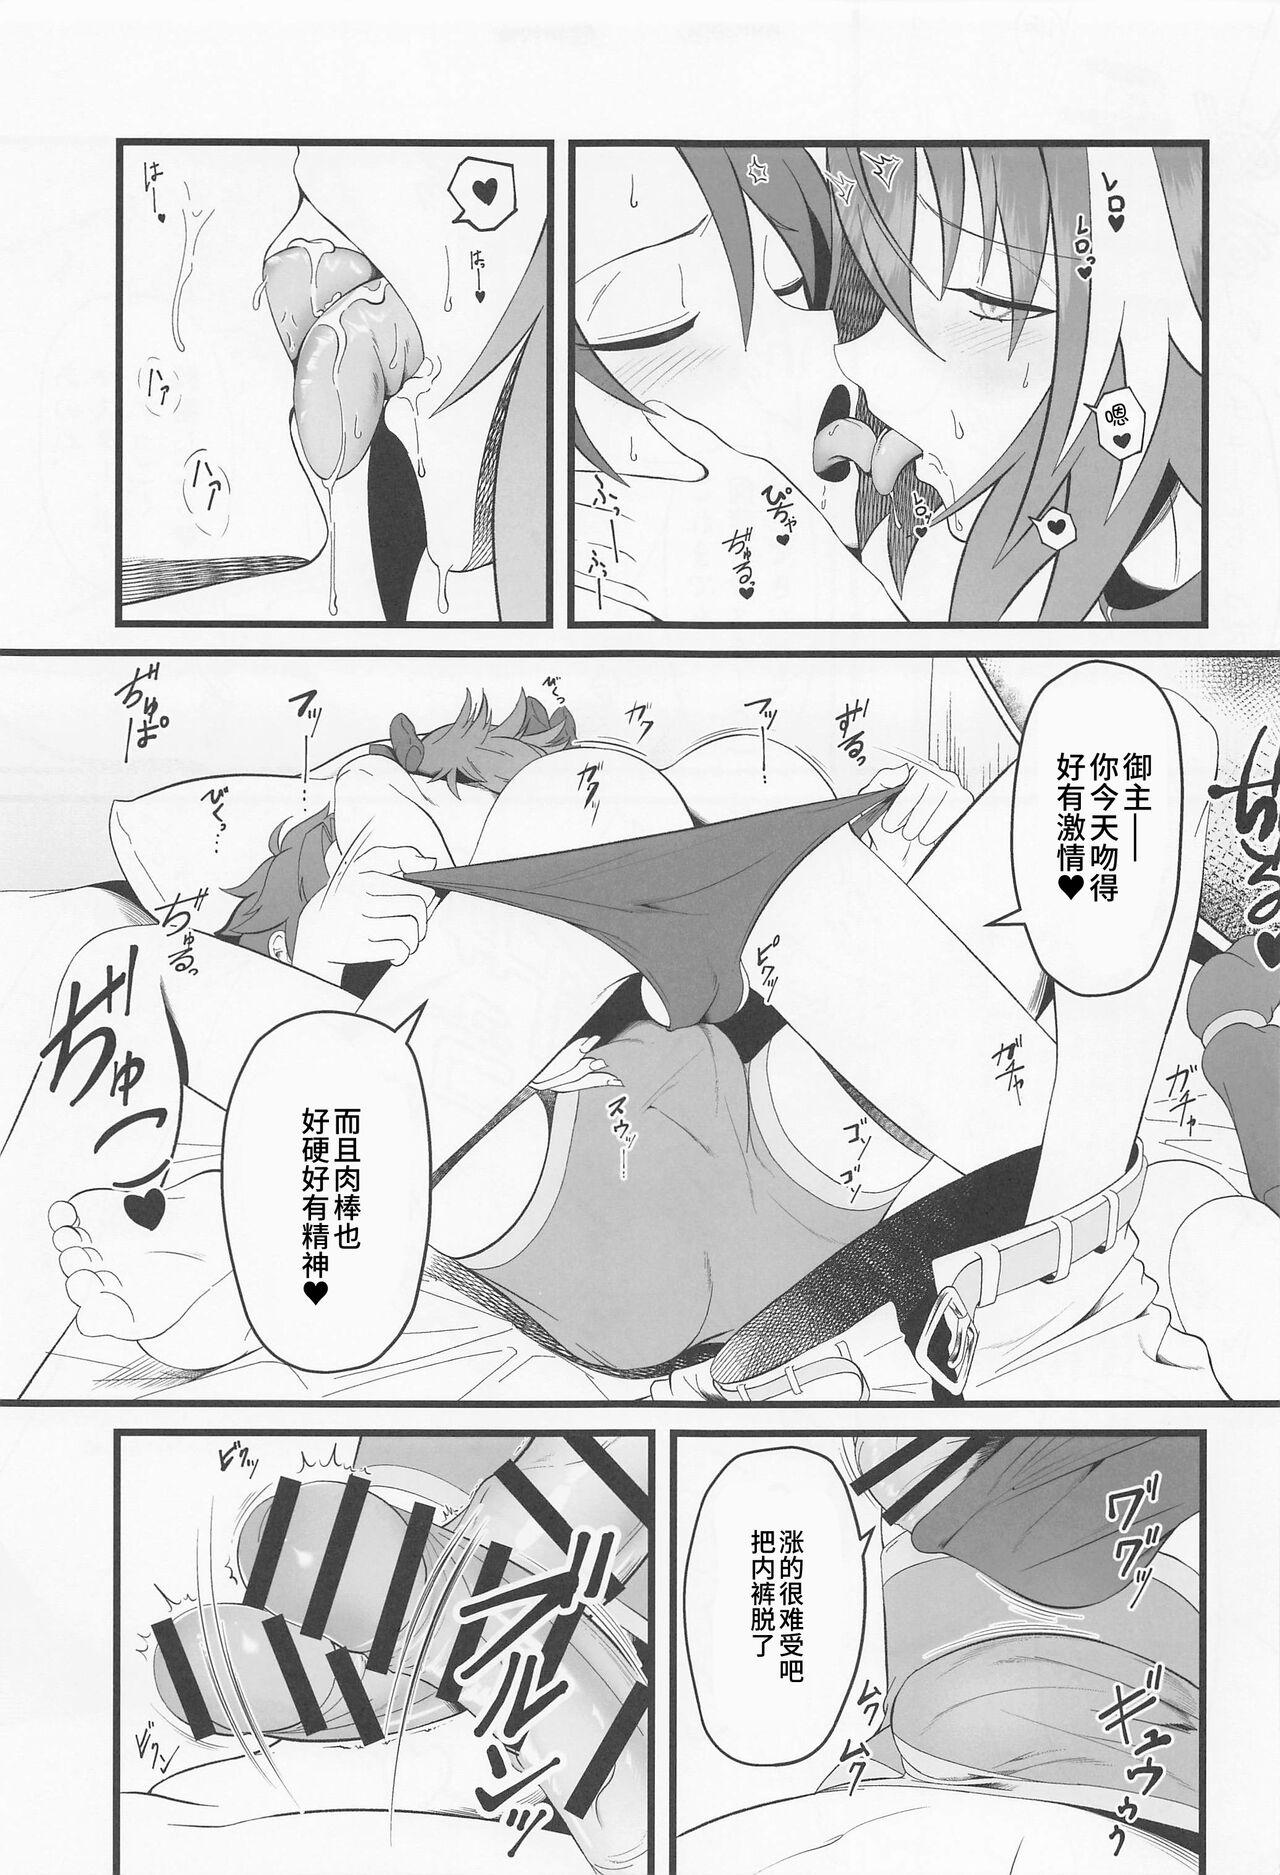 Shorts Kimi no Ichiban ni Naritakute - I wanted to be your number one. - Fate grand order Erotica - Page 10